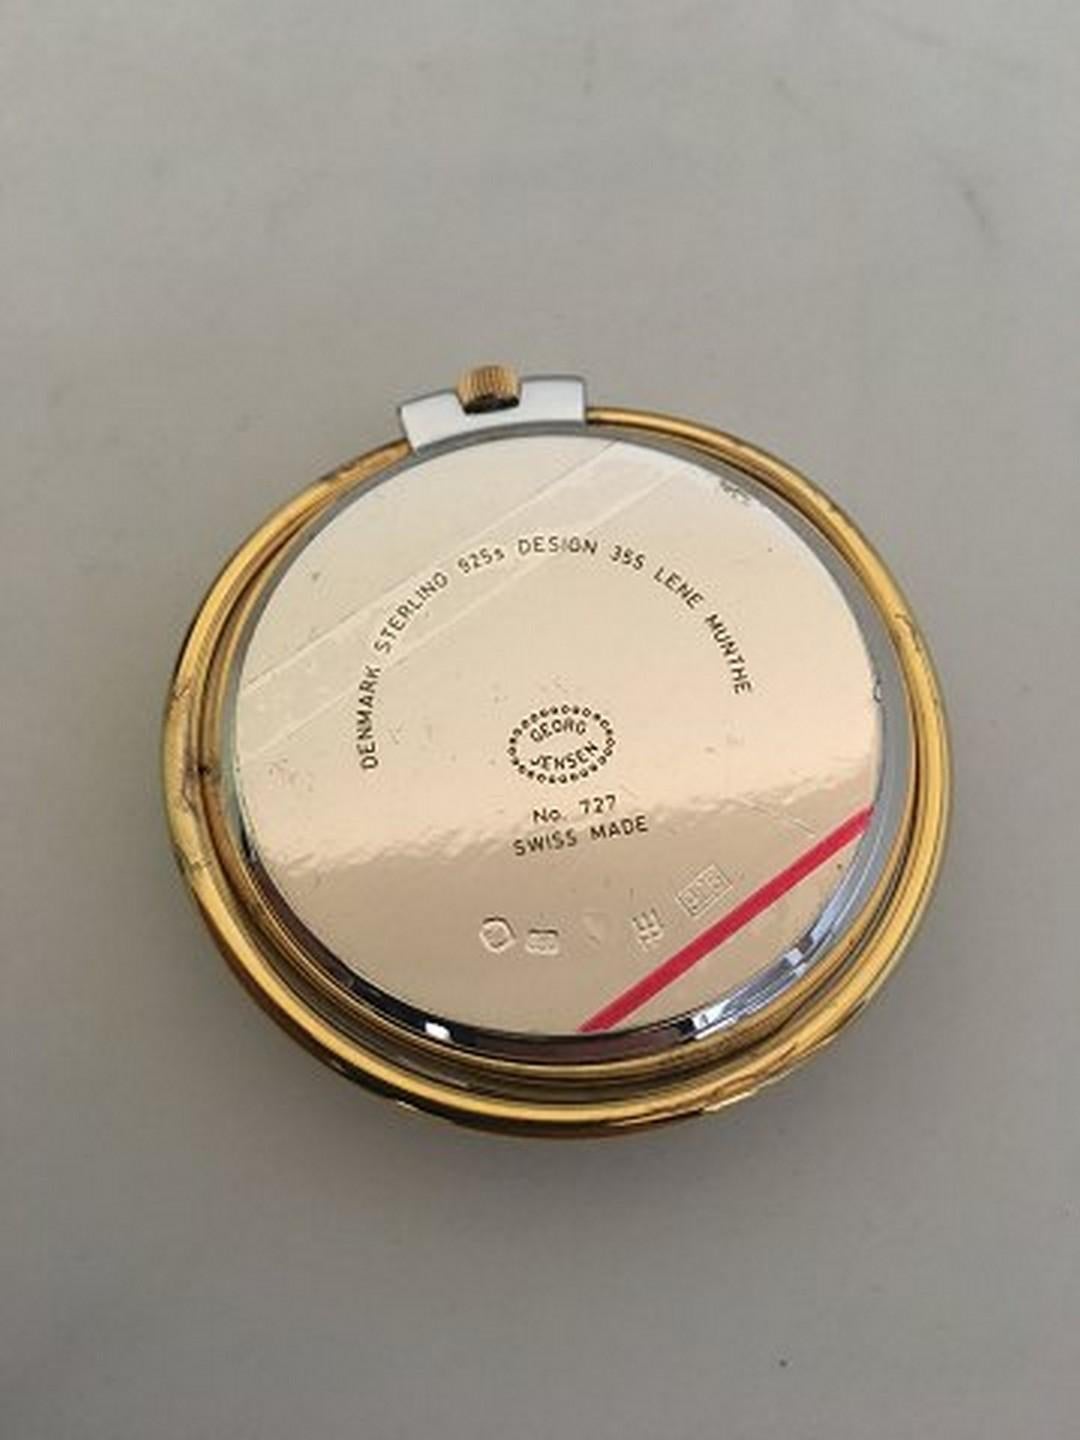 Georg Jensen Sterling Silver Pocket watch / Table watch No. 355 designed by Lene Munthe. With gilded round circle / standing mechanism. Weighs 89 grams (3.15 oz). Meaures 5.5 cm diameter (2 11/64